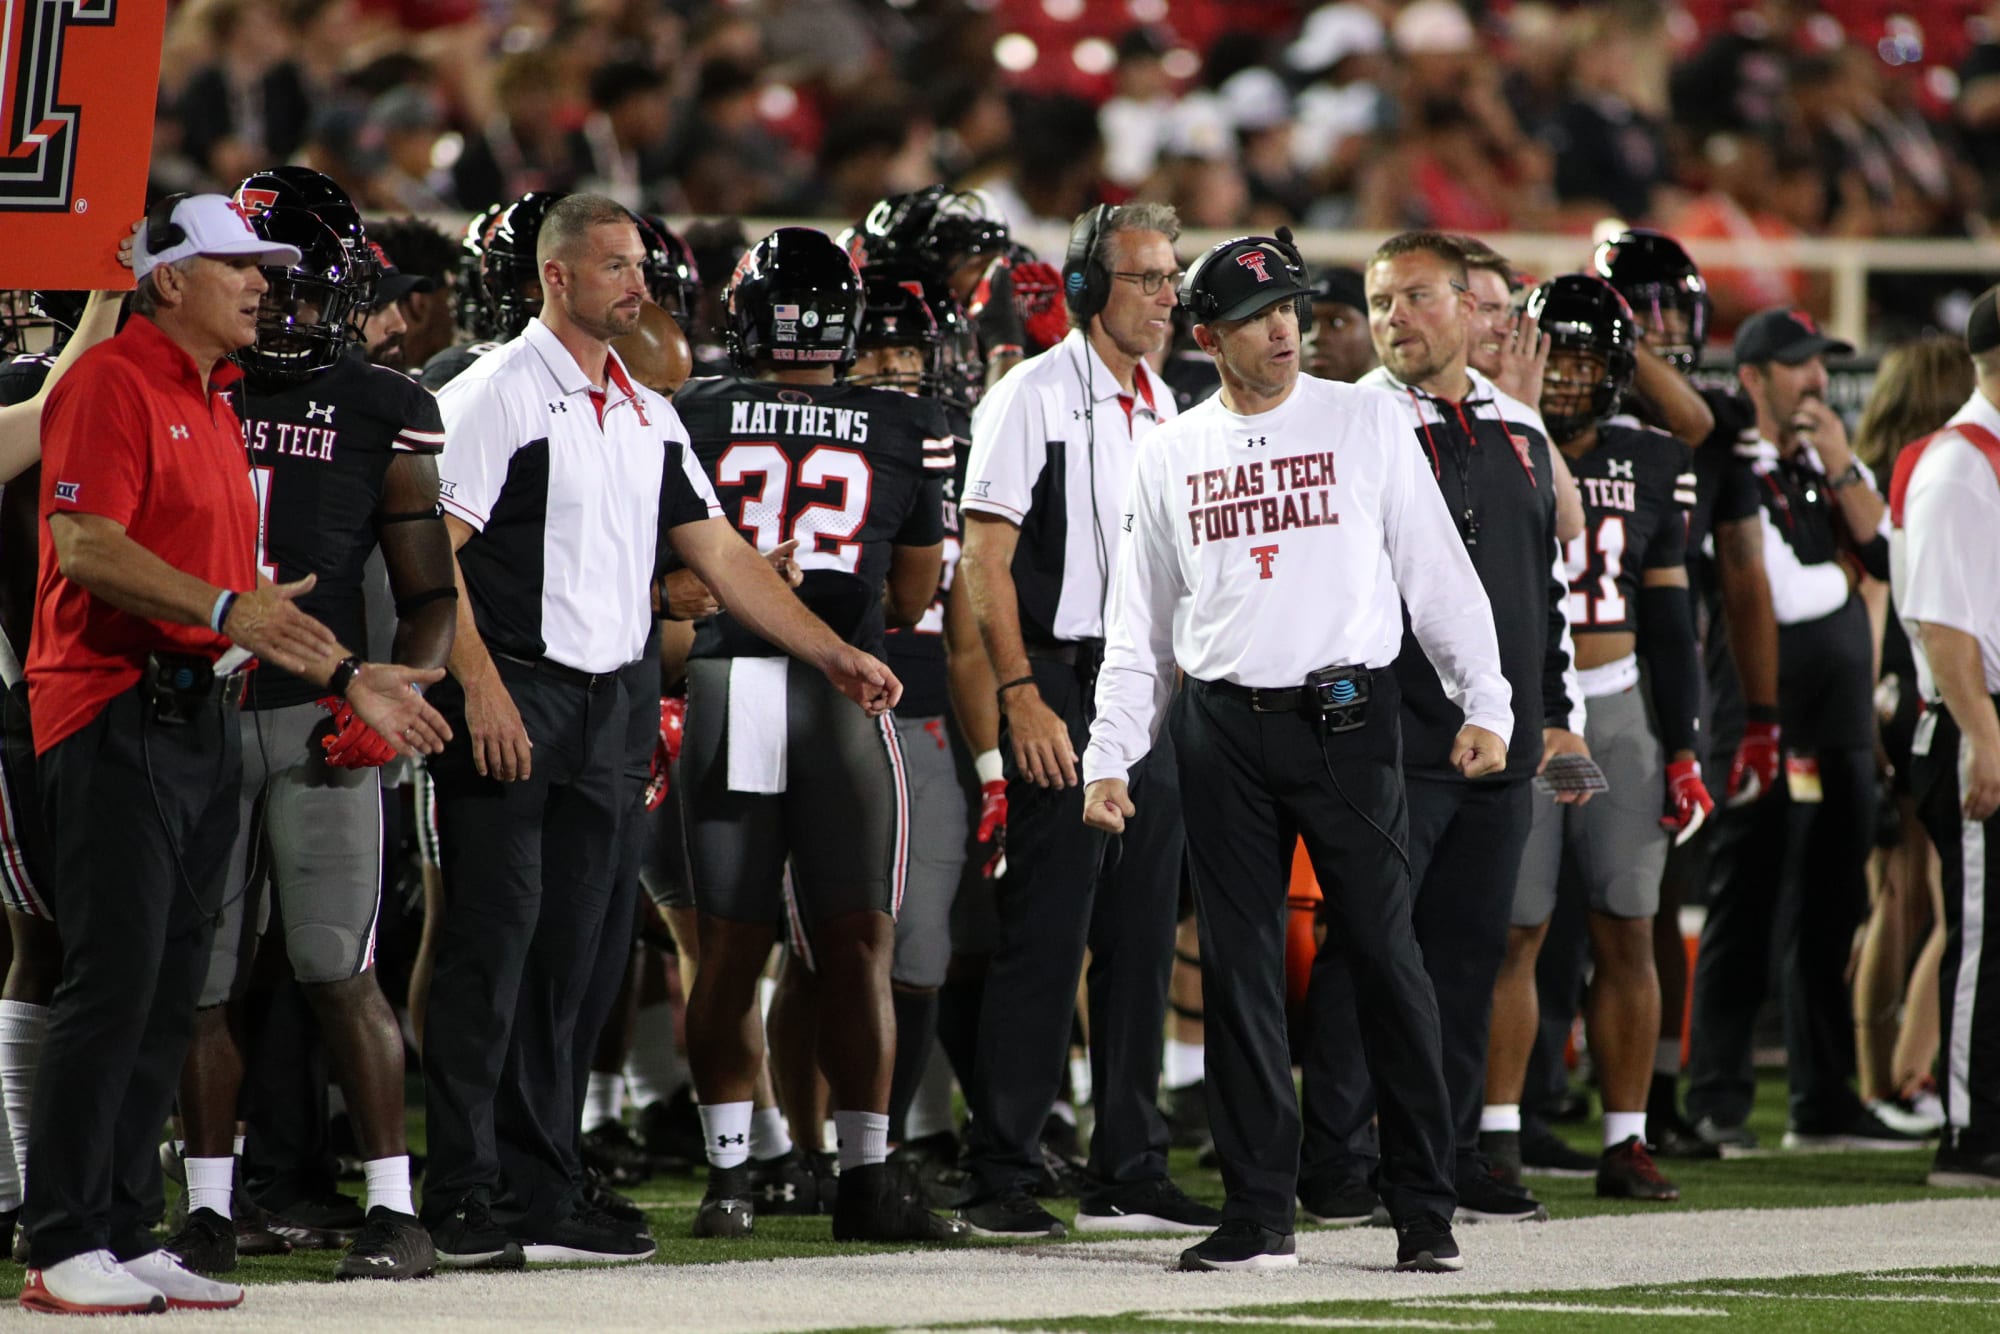 Texas Tech football: Quick thoughts on Red Raiders blowout loss to OU